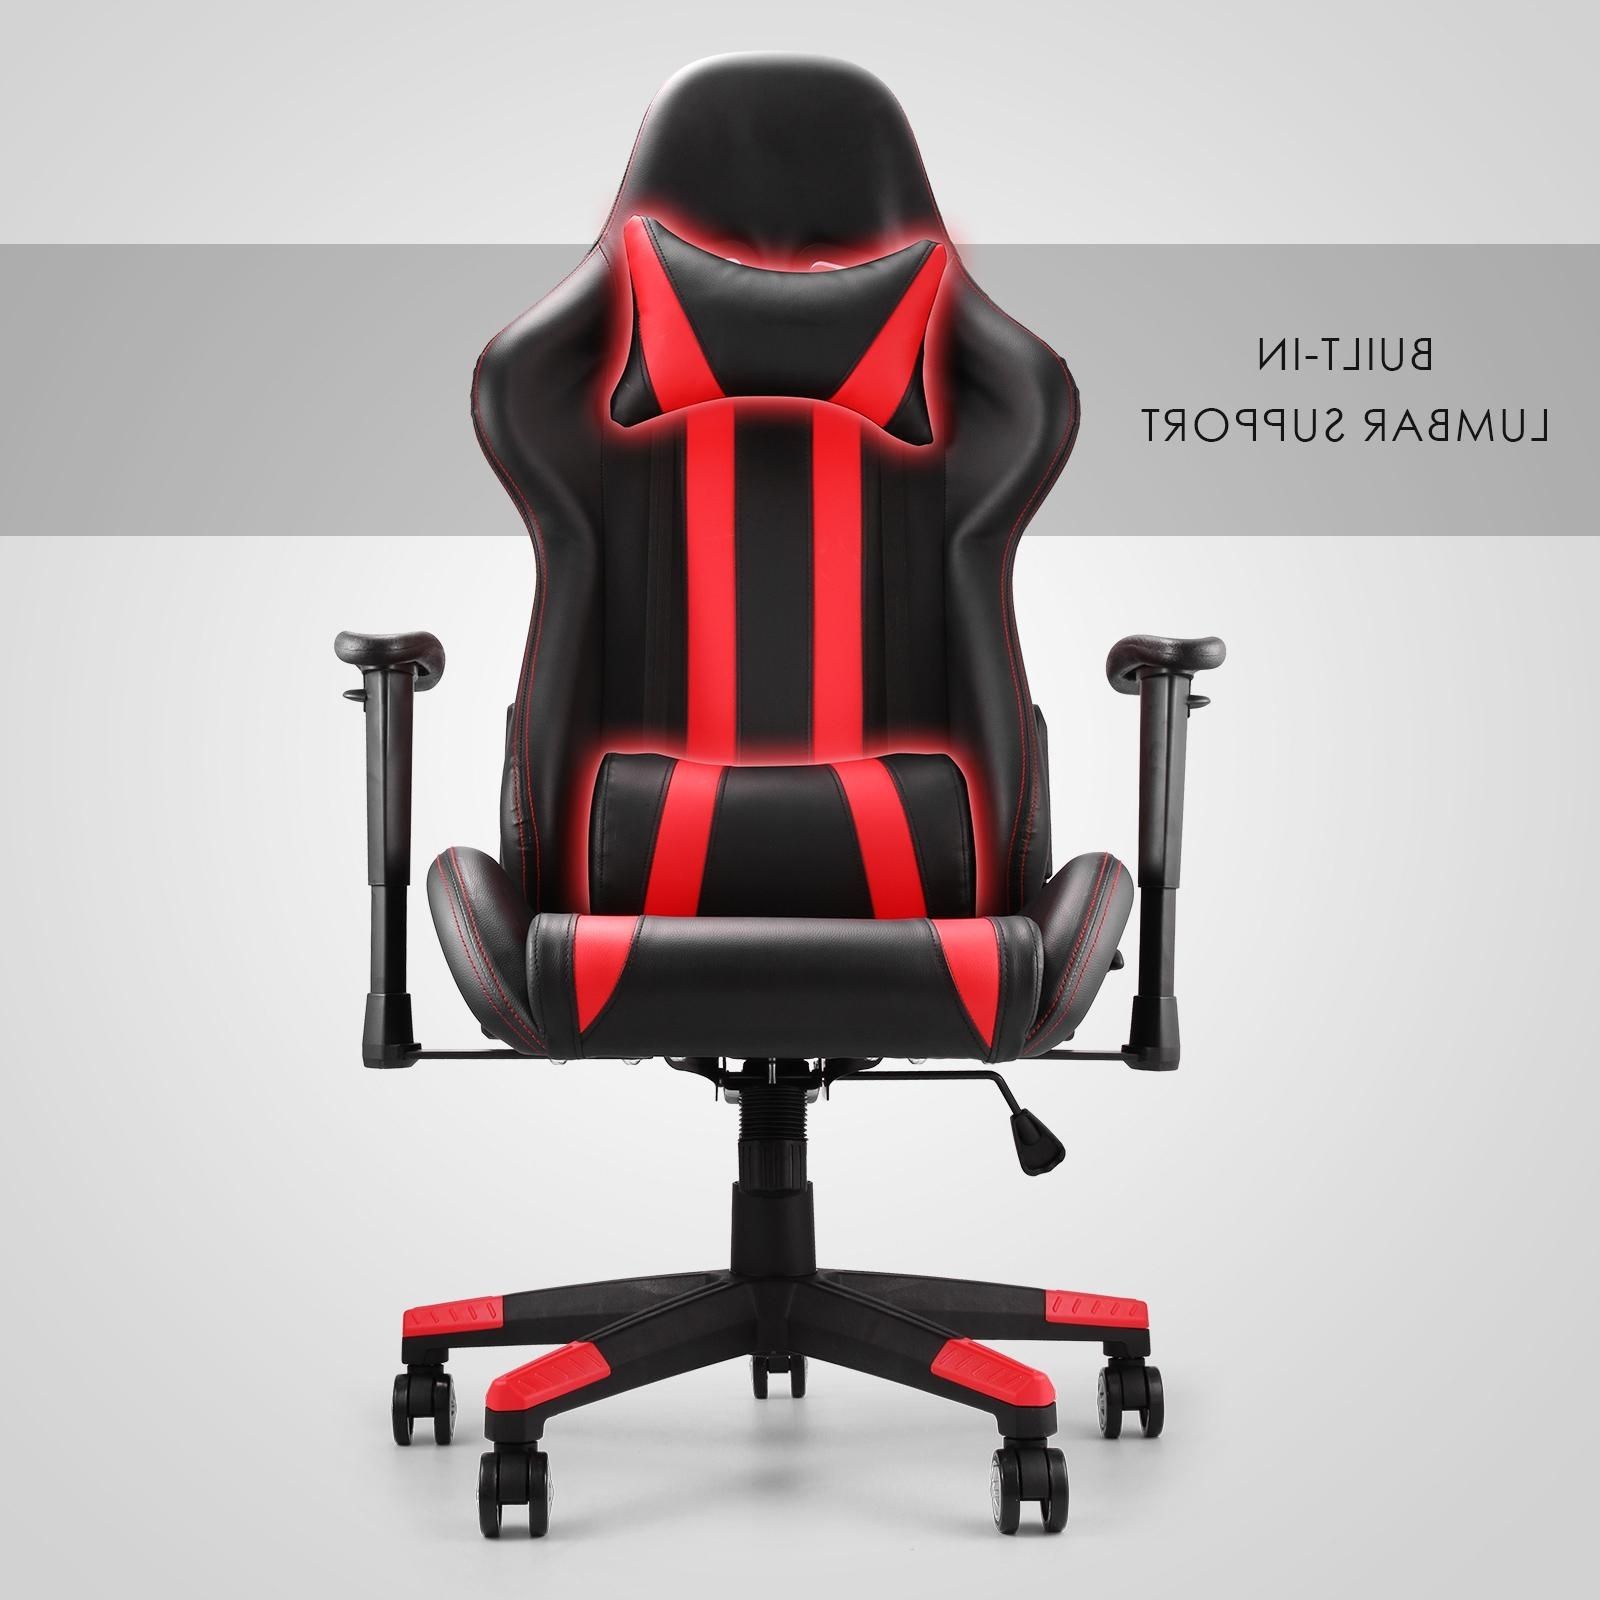 Executive Office Racing Chairs Regarding 2019 2018 Mophorn High Back Reclining Chair Executive Racing Style (View 17 of 20)